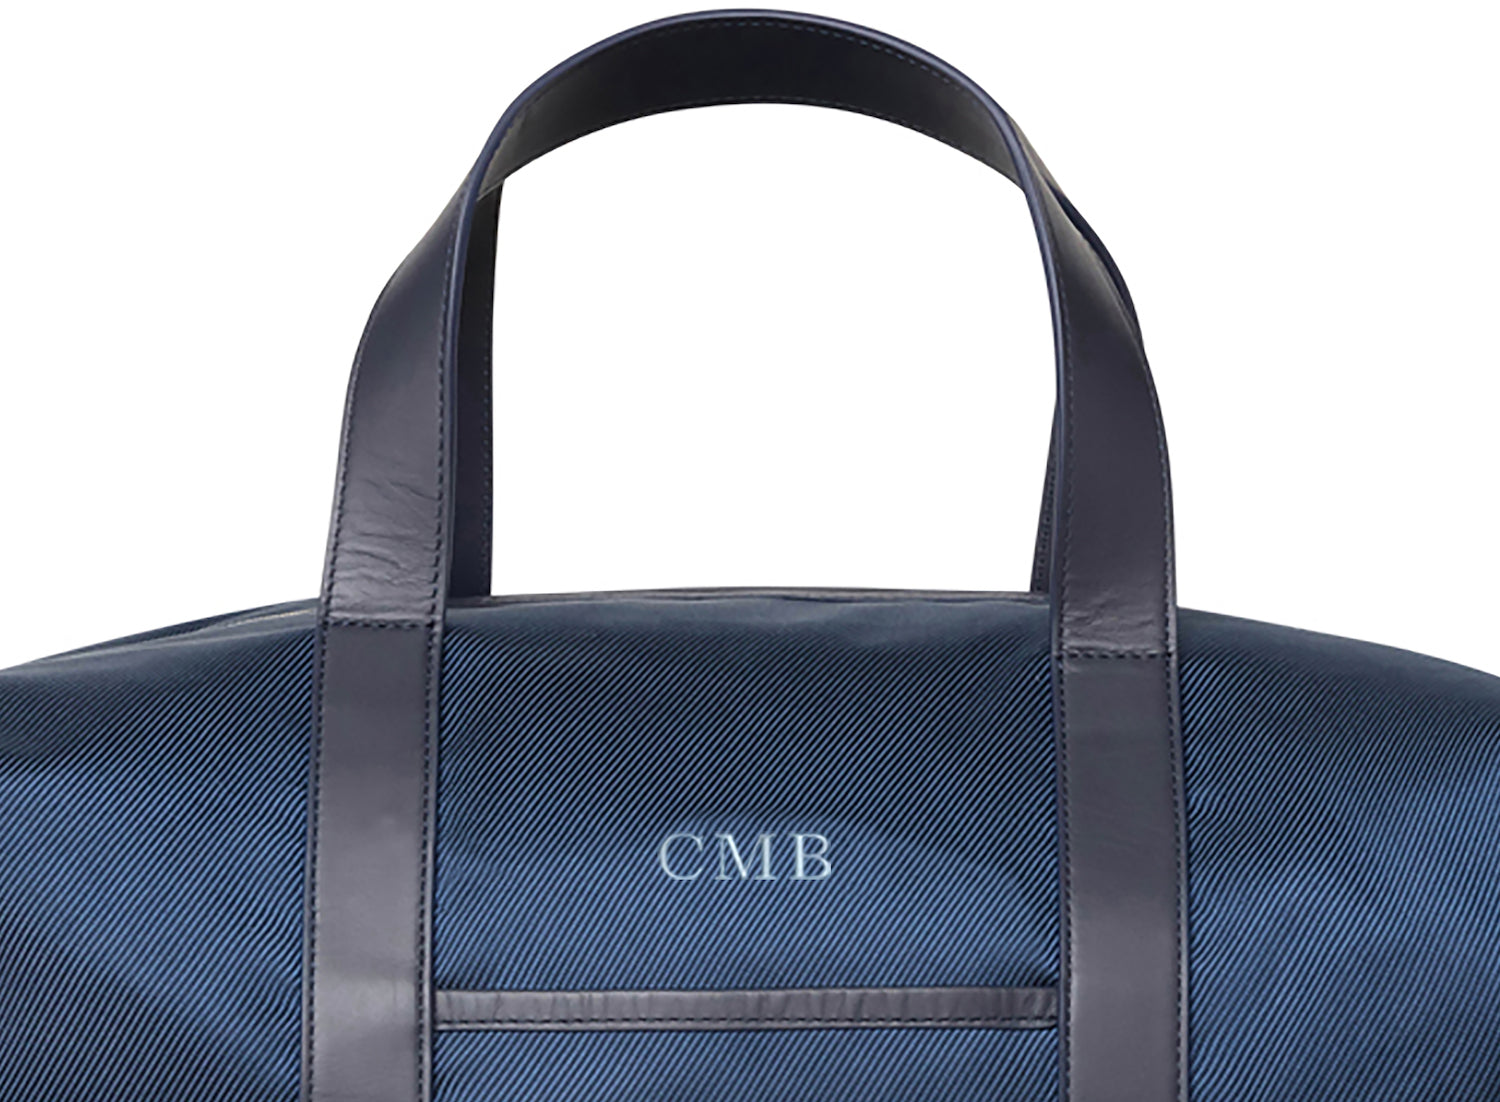 Navy blue duffle bag with dark leather straps and embroidered lettering from Holderness and Bourne.